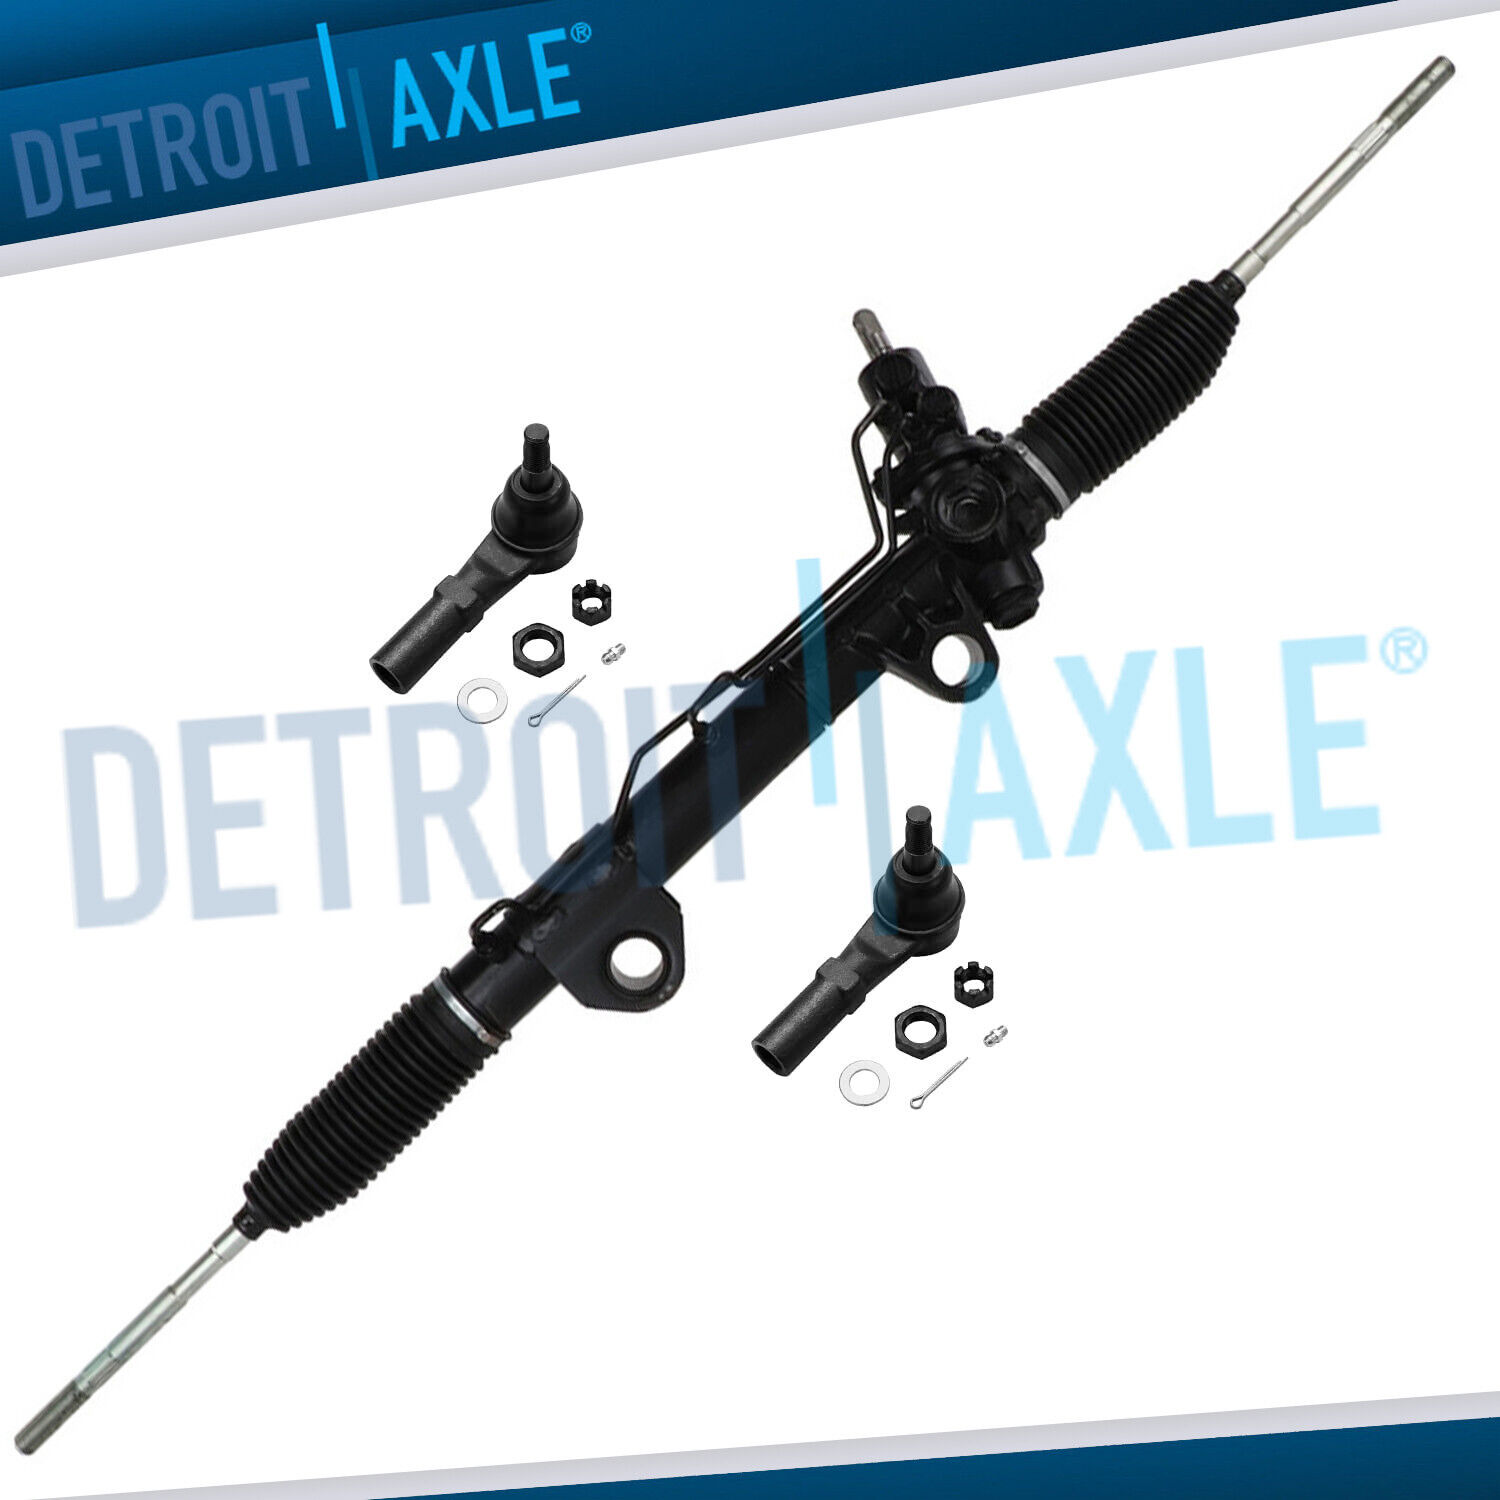 4WD Power Steering Rack and Pinion + Outer Tie Rods for 2002-2005 Dodge Ram 1500